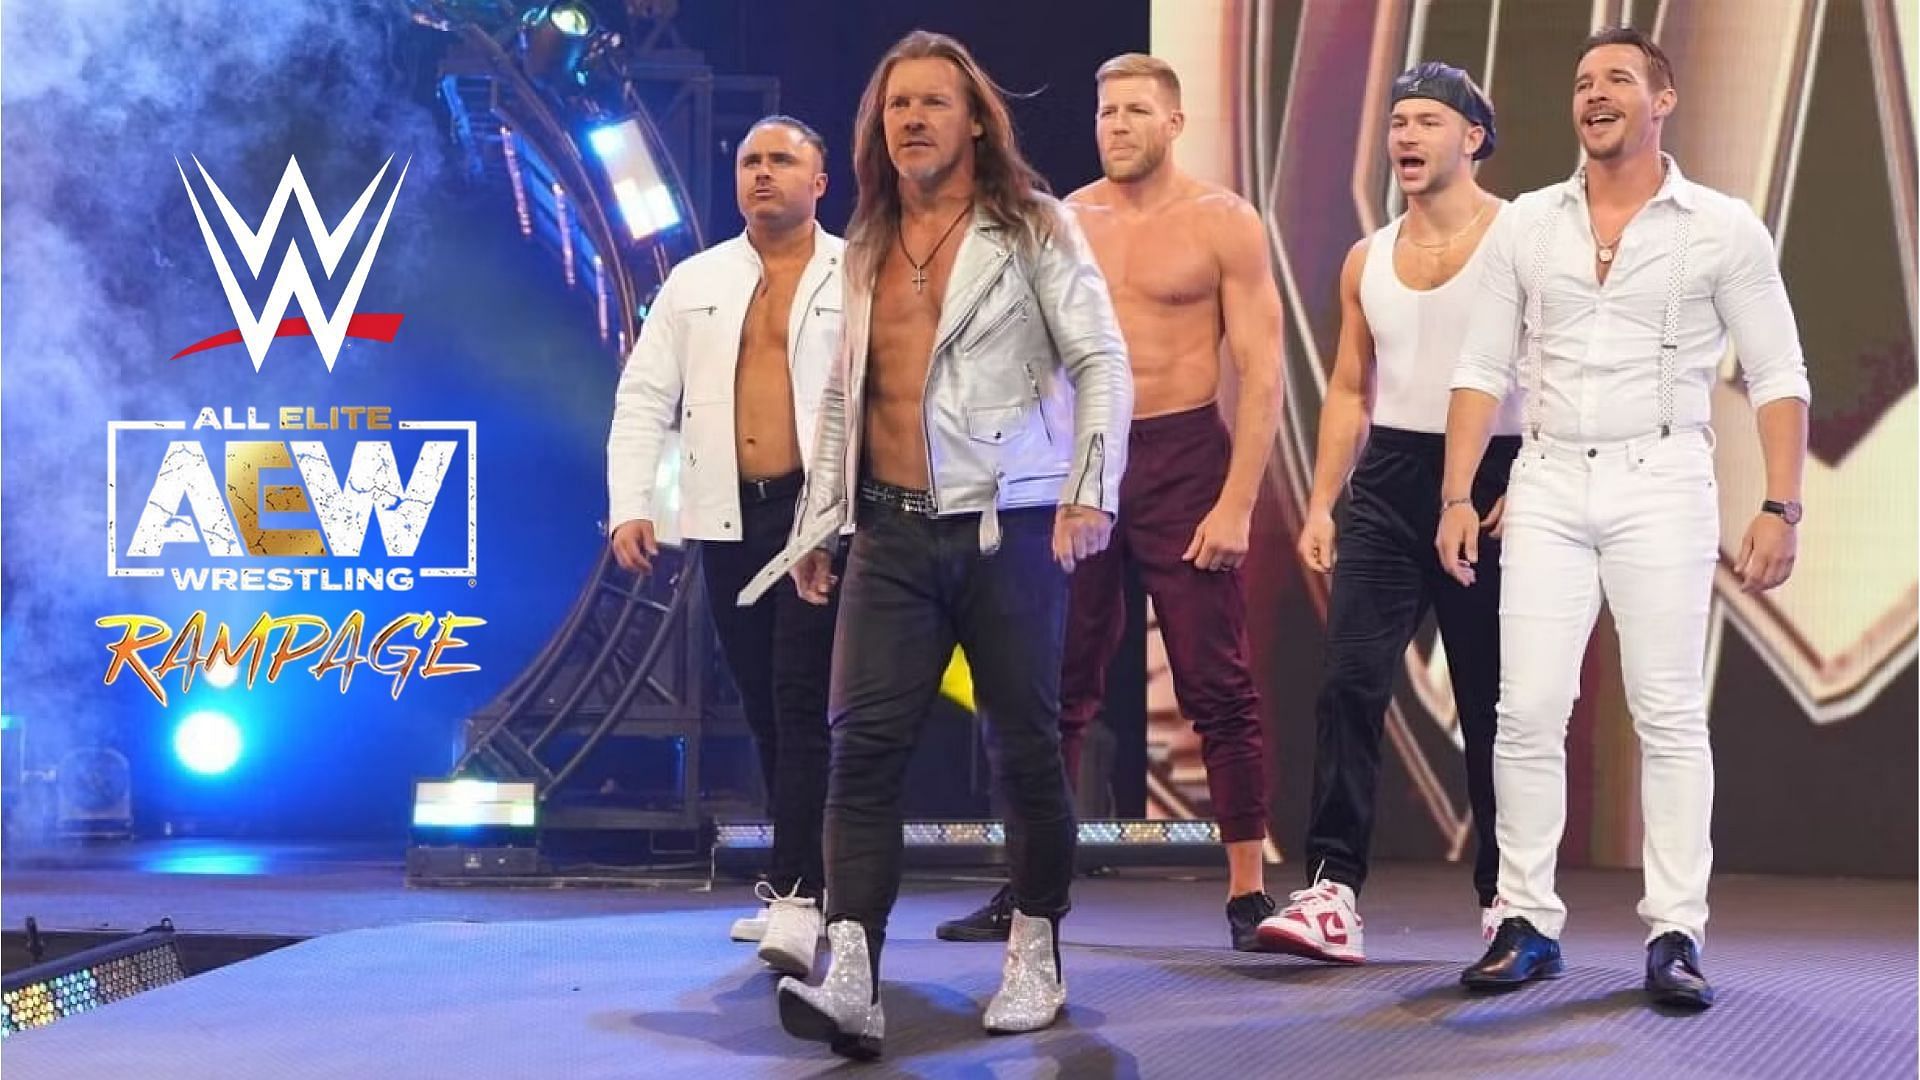 Another exciting edition of AEW Rampage